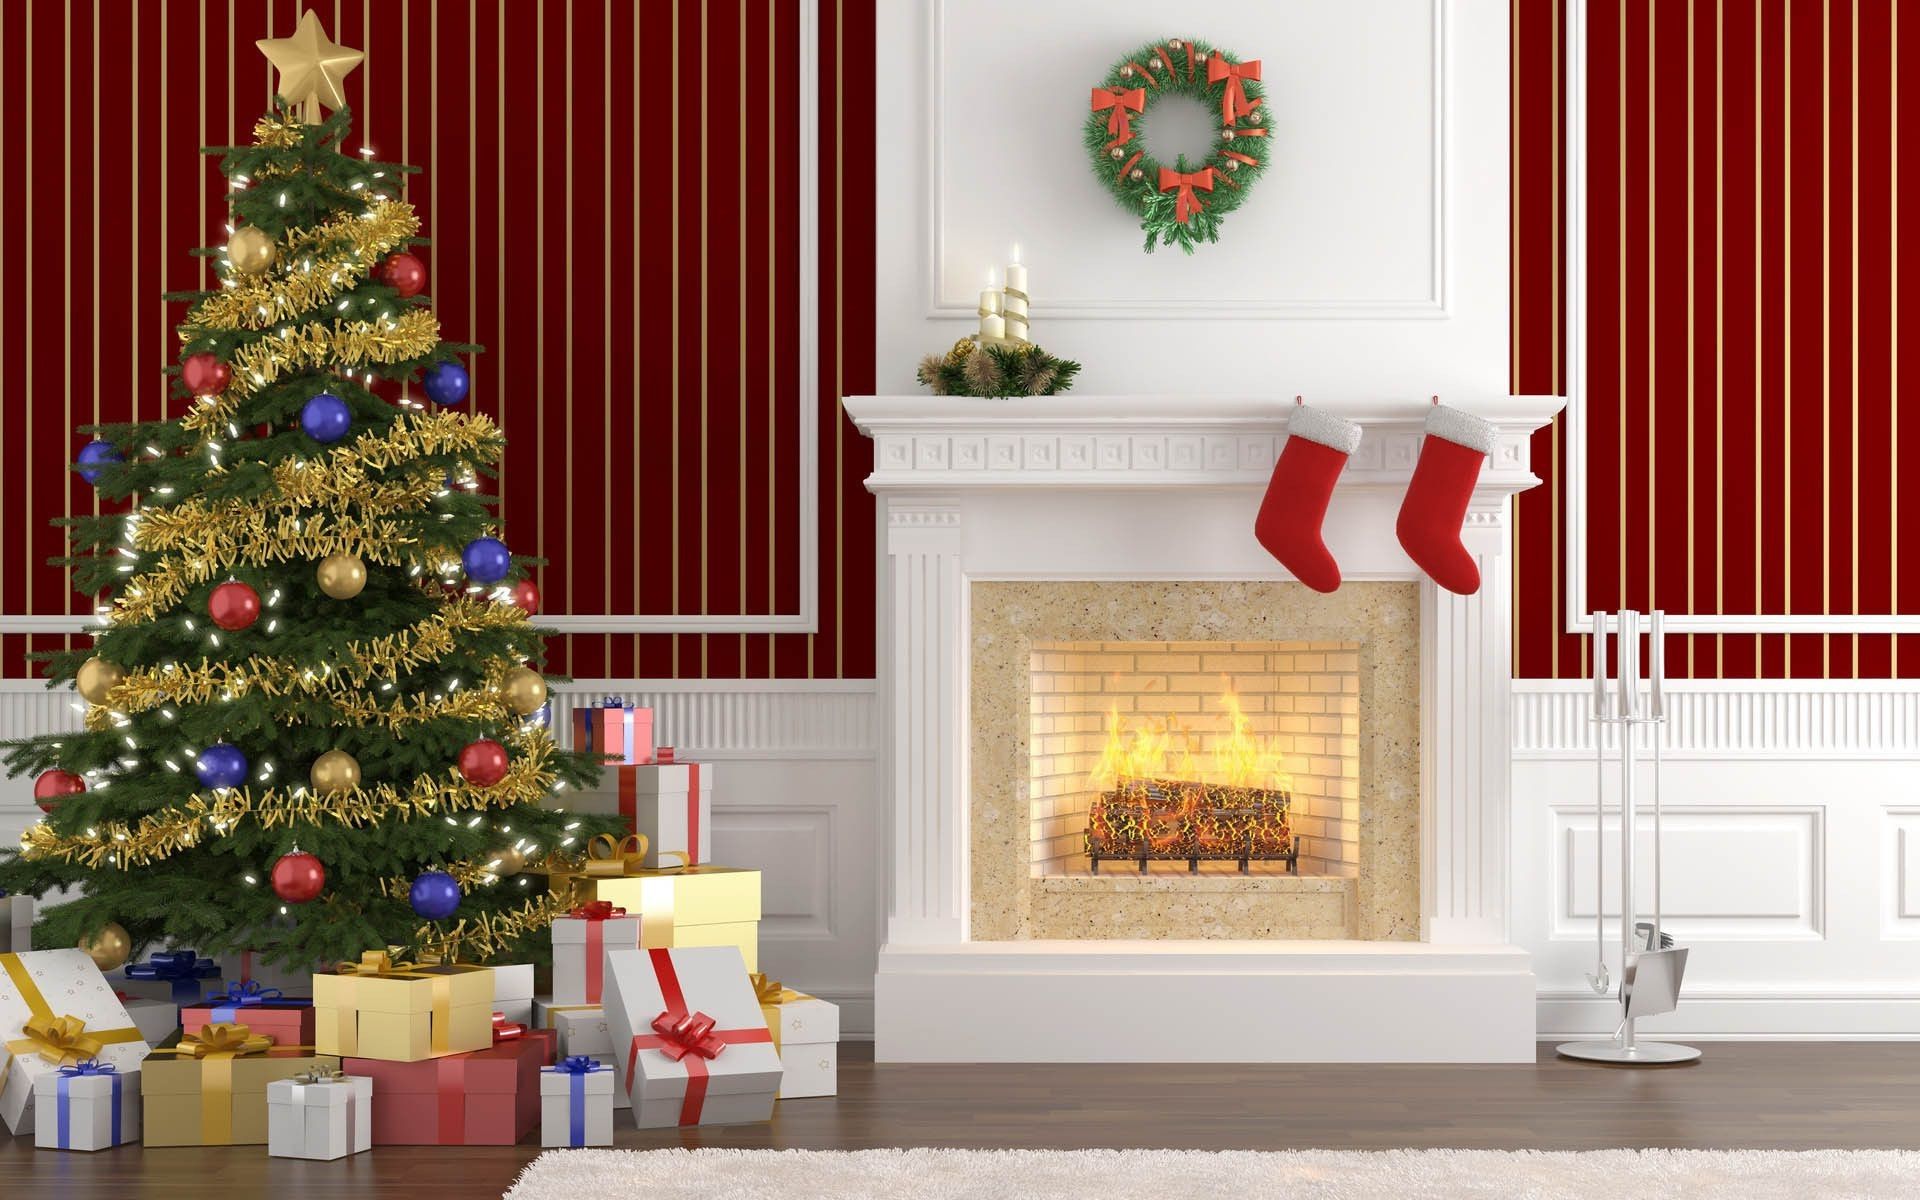 Interior gifts fireplace Christmas tree